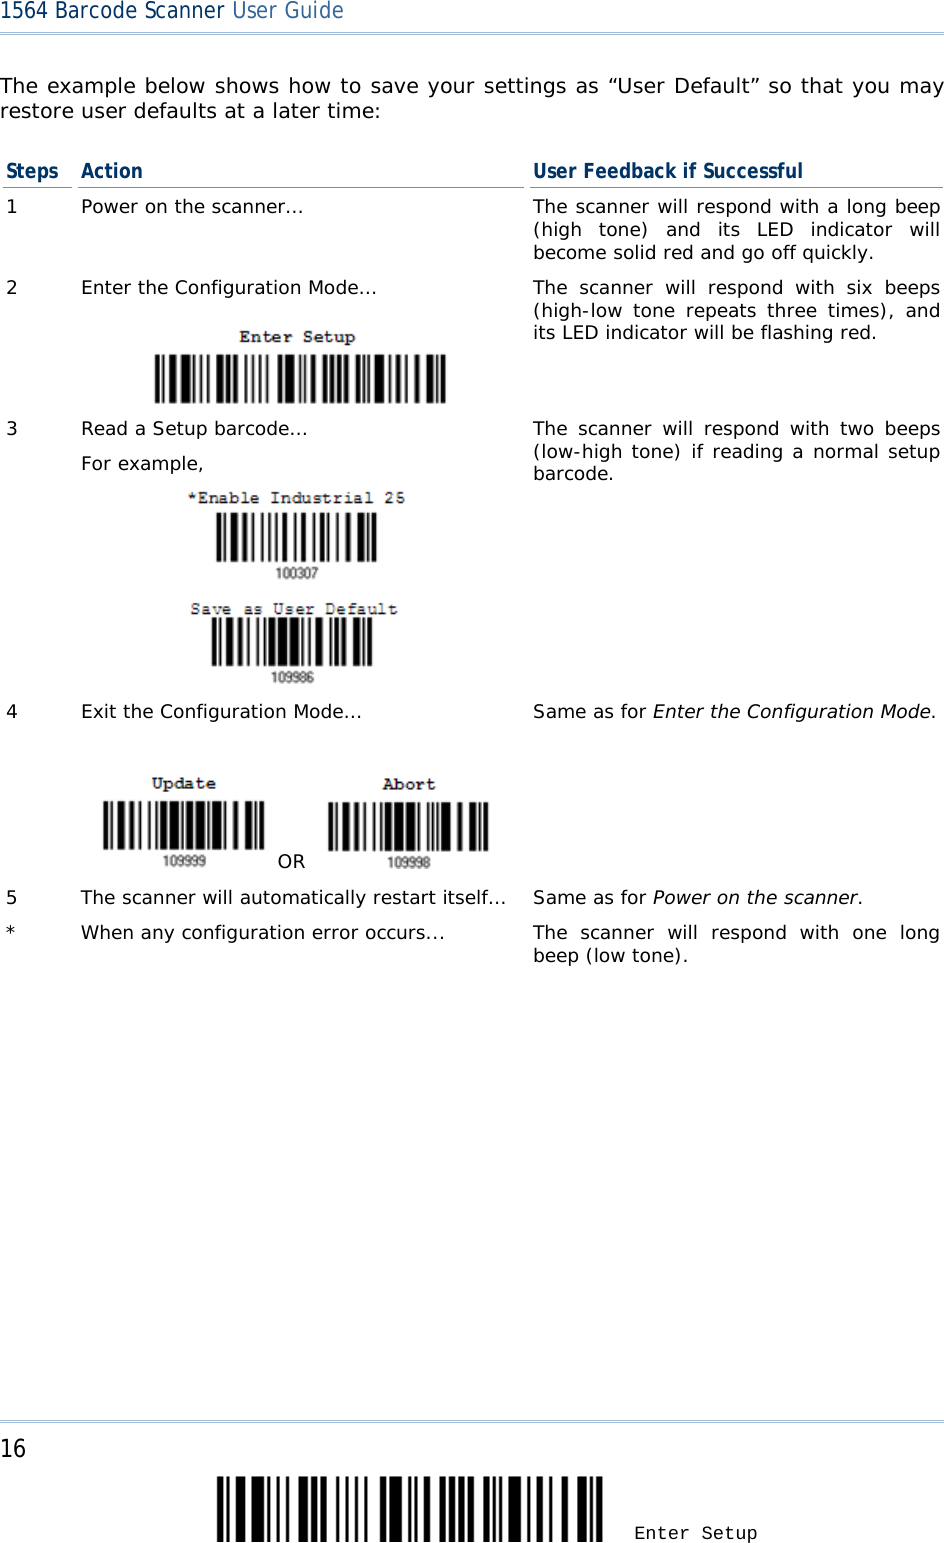 16 Enter Setup 1564 Barcode Scanner User Guide  The example below shows how to save your settings as “User Default” so that you may restore user defaults at a later time: Steps Action User Feedback if Successful 1  Power on the scanner… The scanner will respond with a long beep (high tone) and its LED indicator will become solid red and go off quickly. 2  Enter the Configuration Mode…   The scanner will respond with six beeps (high-low tone repeats three times), and its LED indicator will be flashing red.  3  Read a Setup barcode… For example,               The scanner will respond with two beeps (low-high tone) if reading a normal setup barcode. 4  Exit the Configuration Mode…      OR    Same as for Enter the Configuration Mode. 5  The scanner will automatically restart itself… Same as for Power on the scanner. *  When any configuration error occurs...  The scanner will respond with one long beep (low tone).   